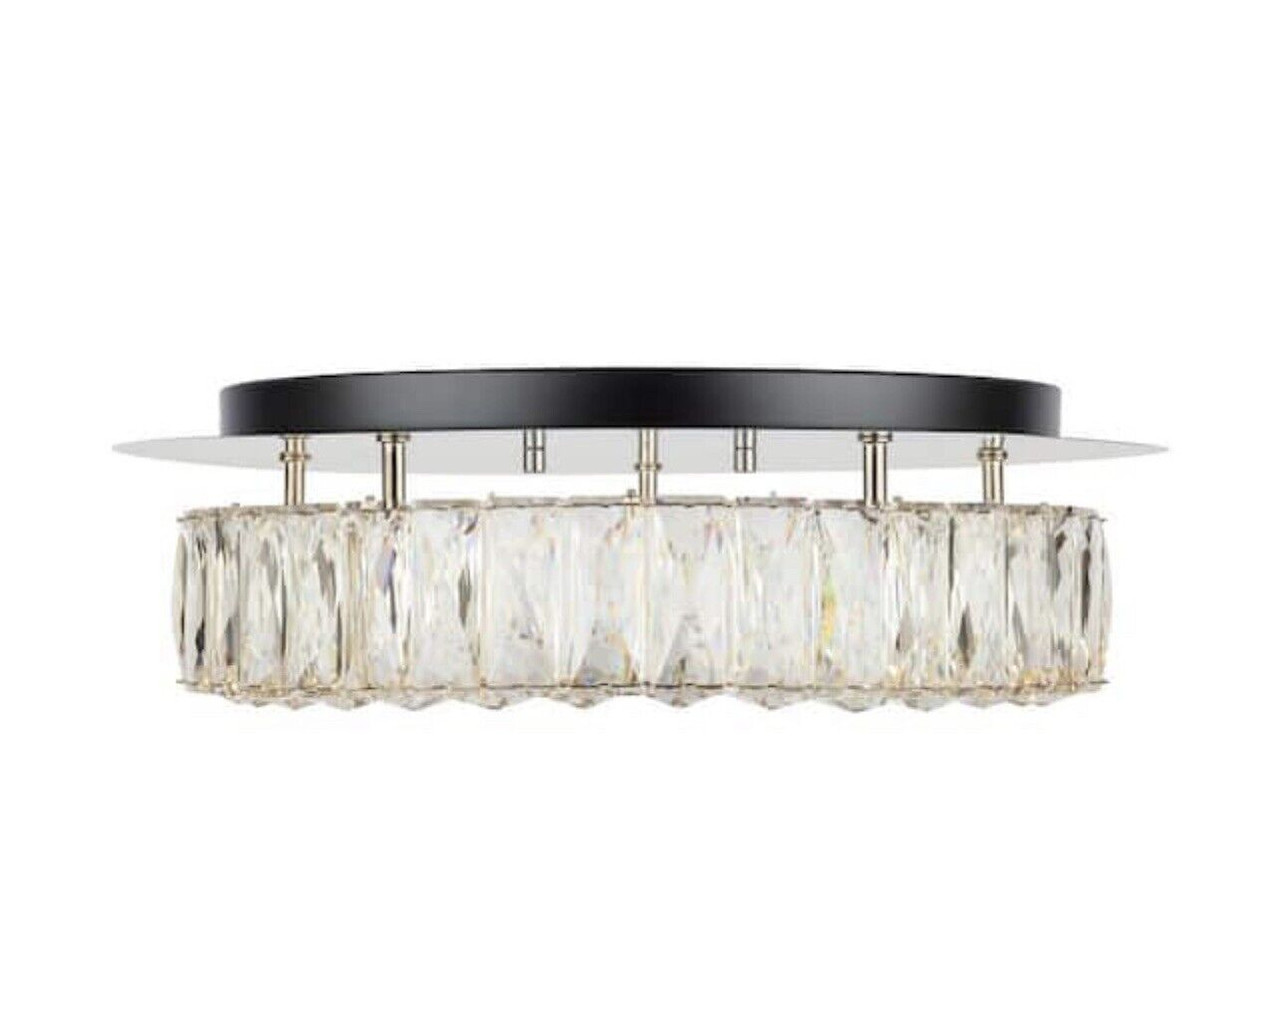 Home Decorators Collection
Keighley Crystal 17.5-in. Polished Chrome Integrated LED Flush Mount Kitchen Ceiling Light Fixture